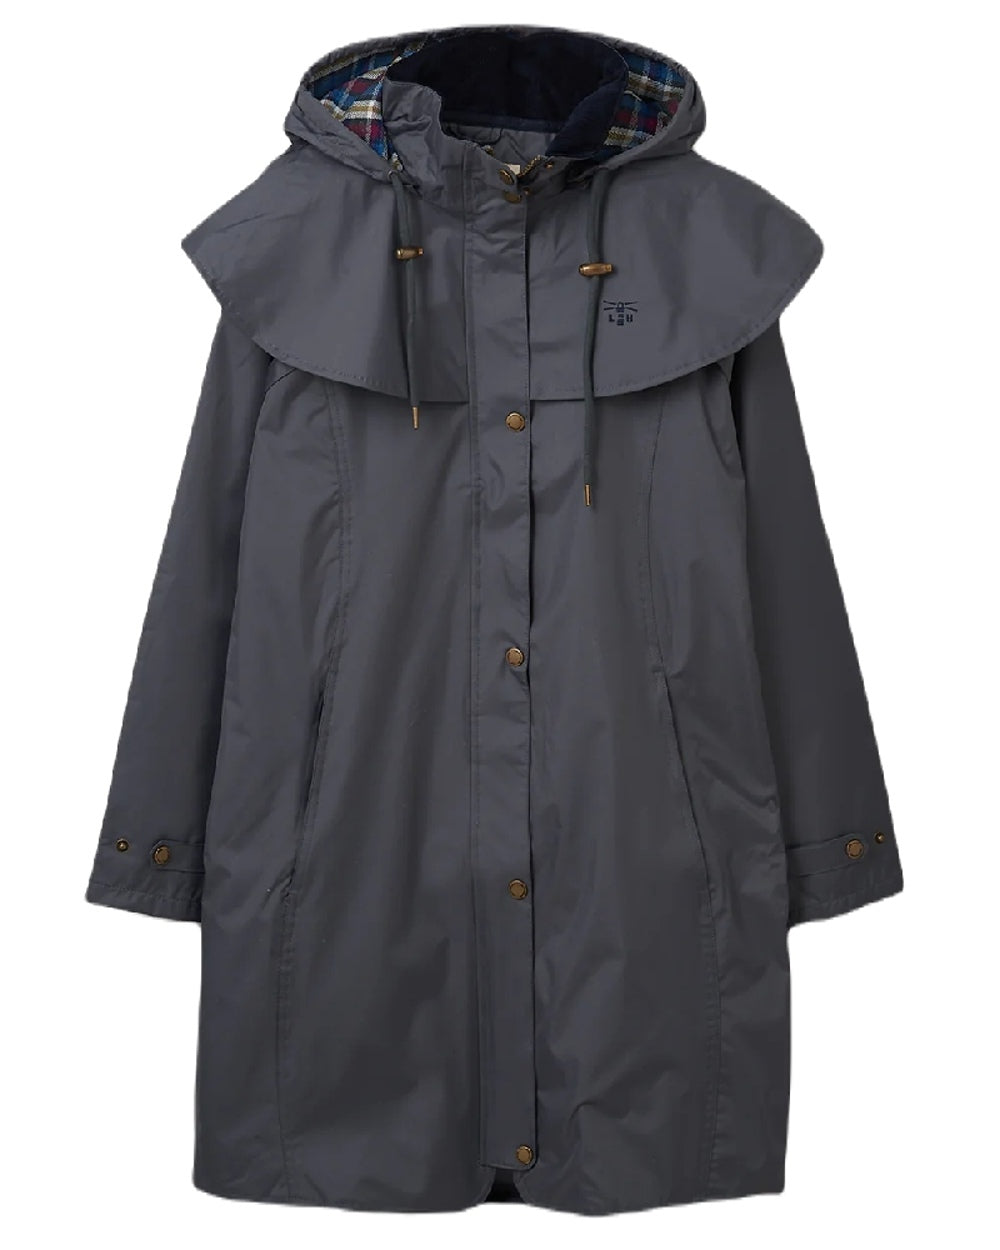 Urban Grey coloured Lighthouse Outrider 3/4 Length Ladies Waterproof Raincoat on White background 